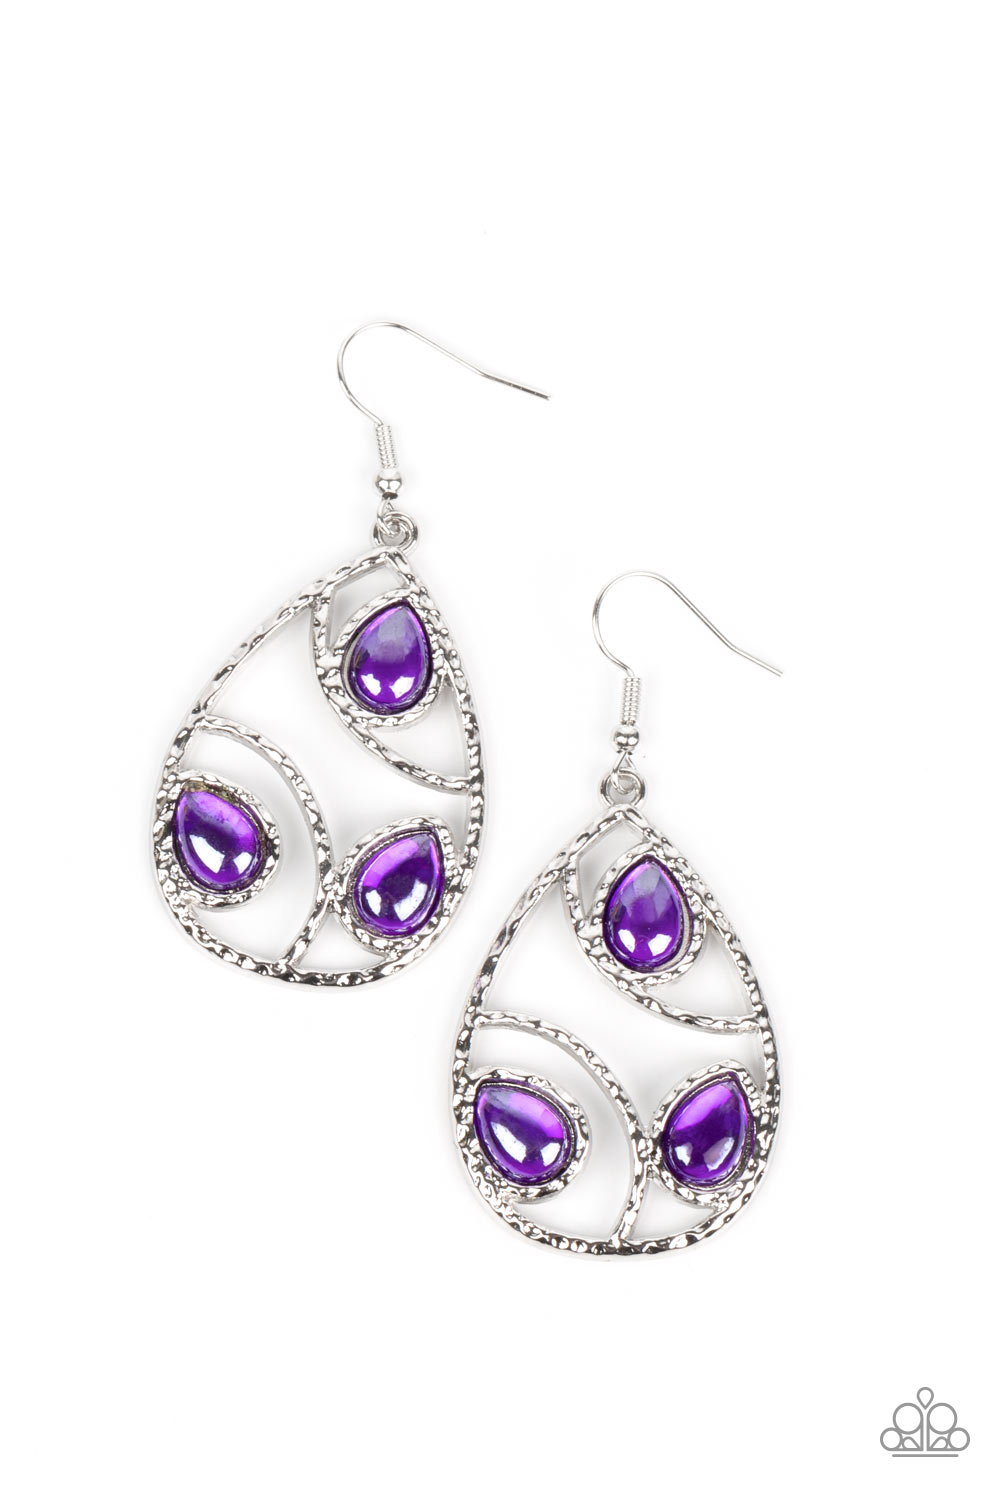 five-dollar-jewelry-send-the-bright-message-purple-earrings-paparazzi-accessories